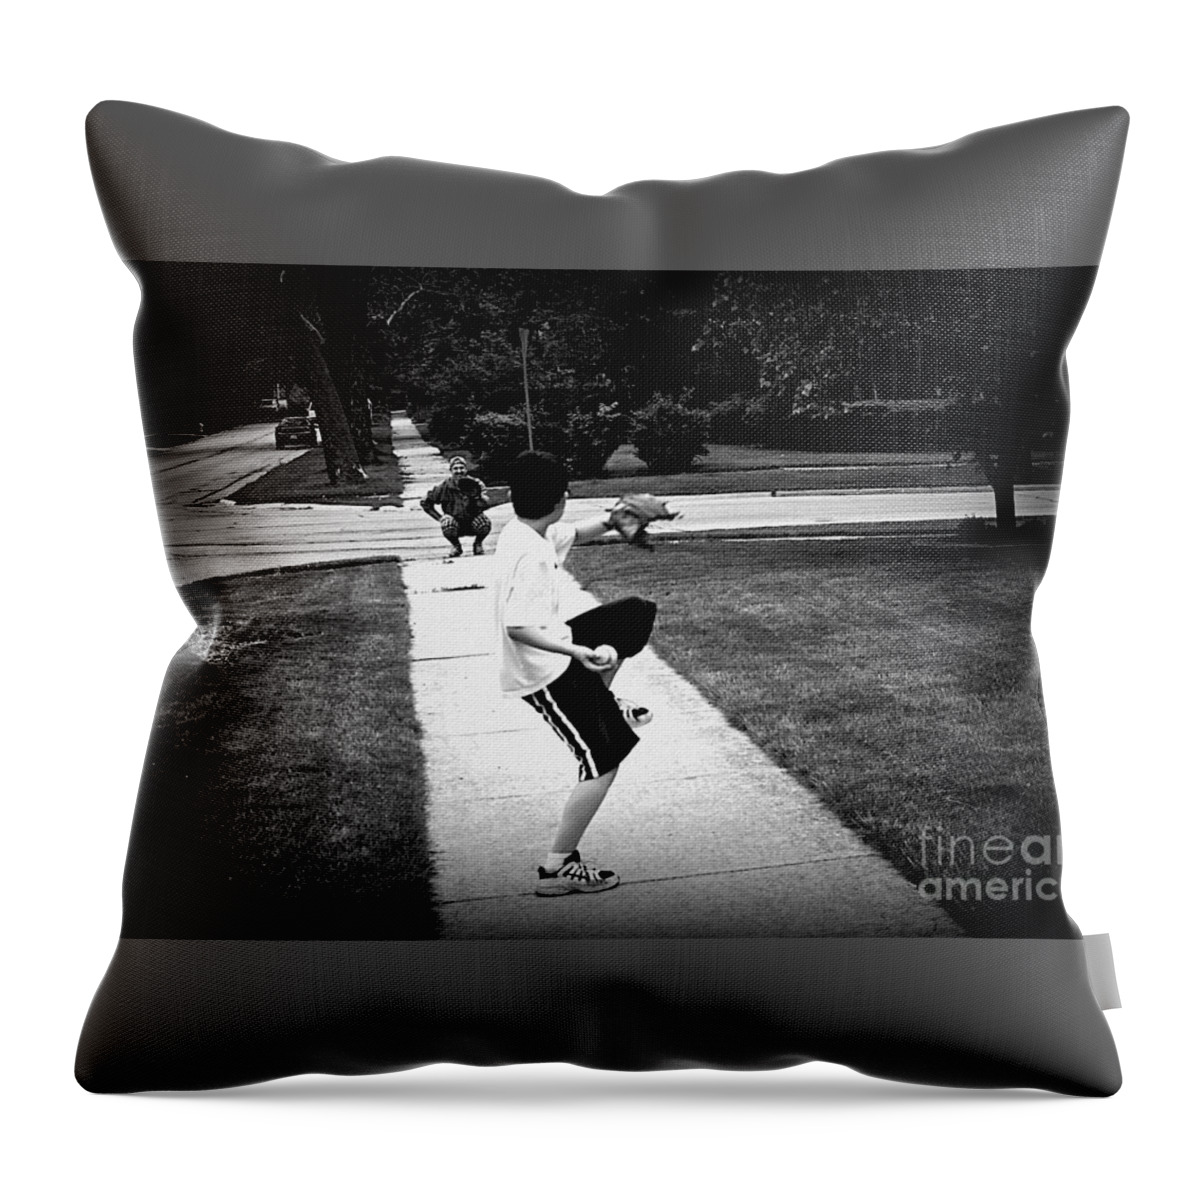 Documentary Throw Pillow featuring the photograph Lead By Example by Frank J Casella